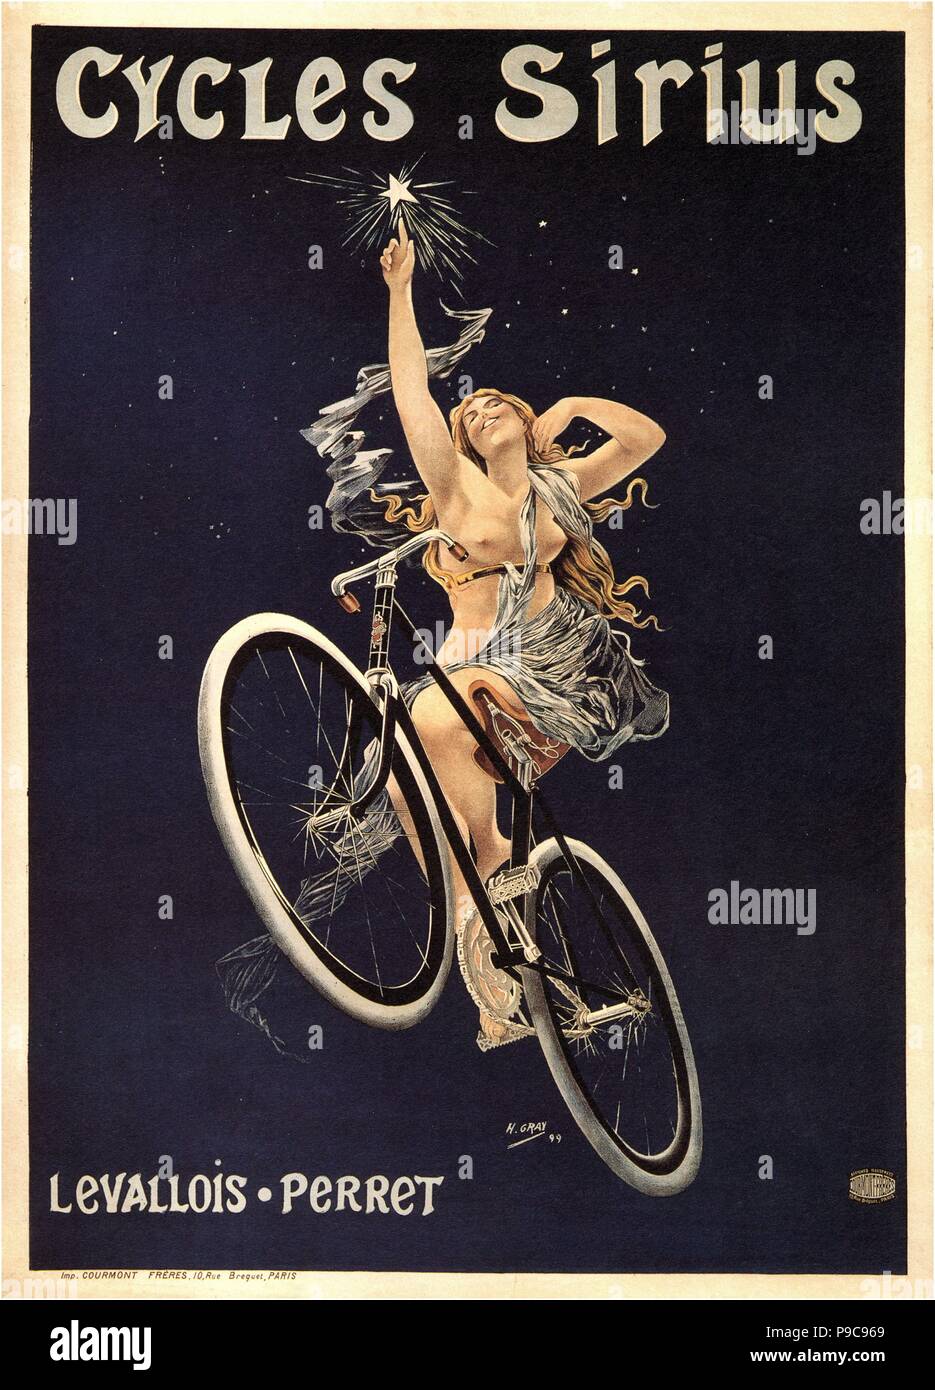 Cycles Sirius. Museum: PRIVATE COLLECTION. Stock Photo